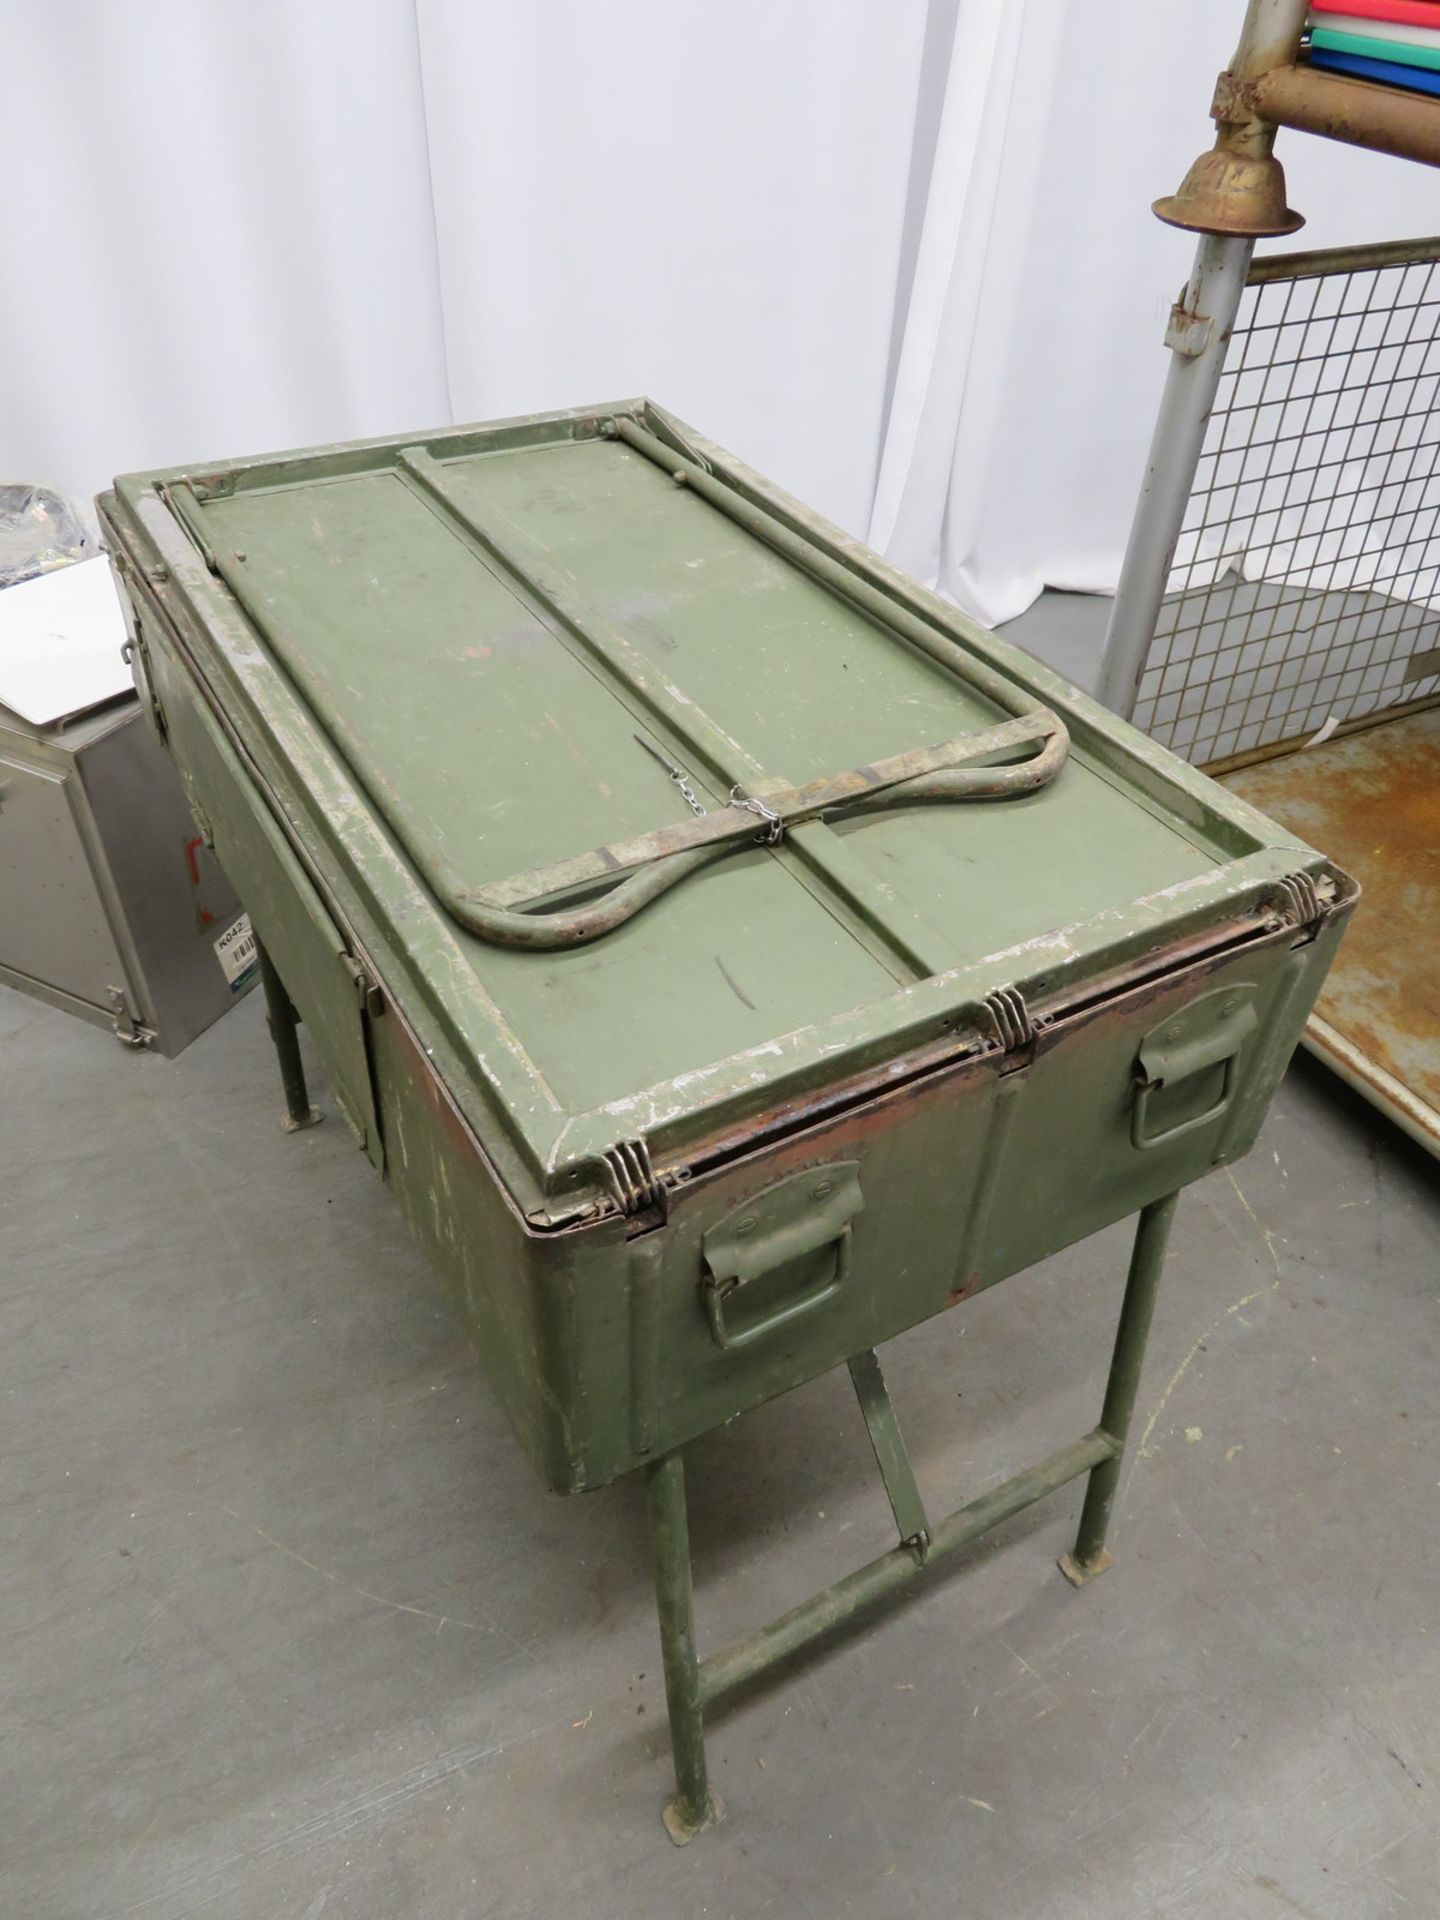 British Army No 5 field cooker & G1 No 5 hot box field oven set. - Image 24 of 24